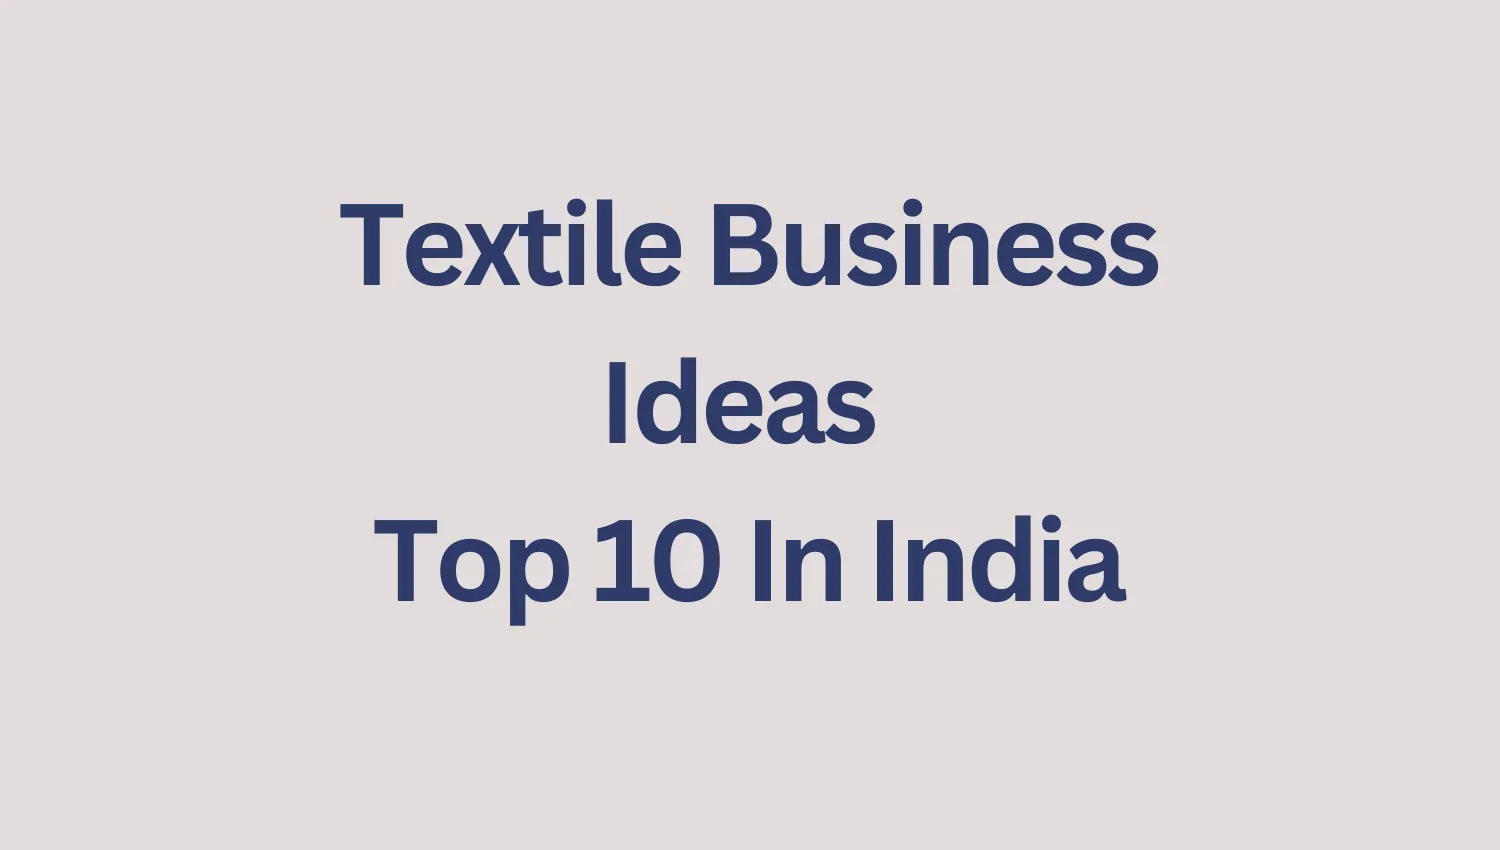 Textile Business Ideas Top 10 In India